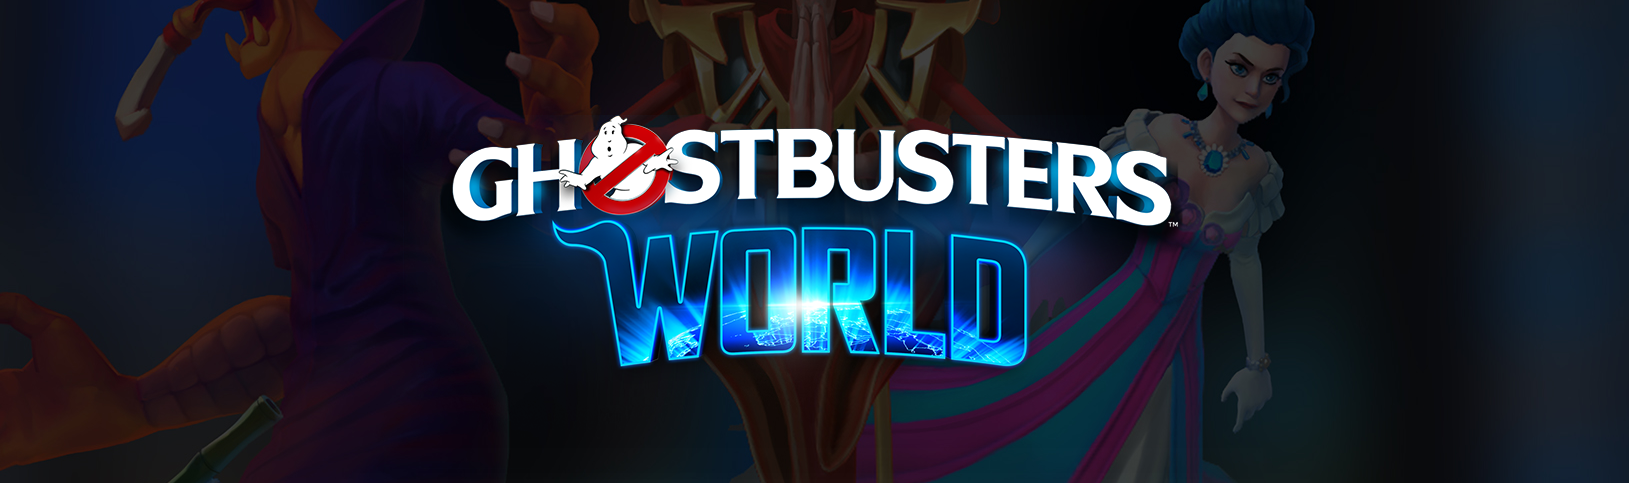 Jeux Ghostbusters World